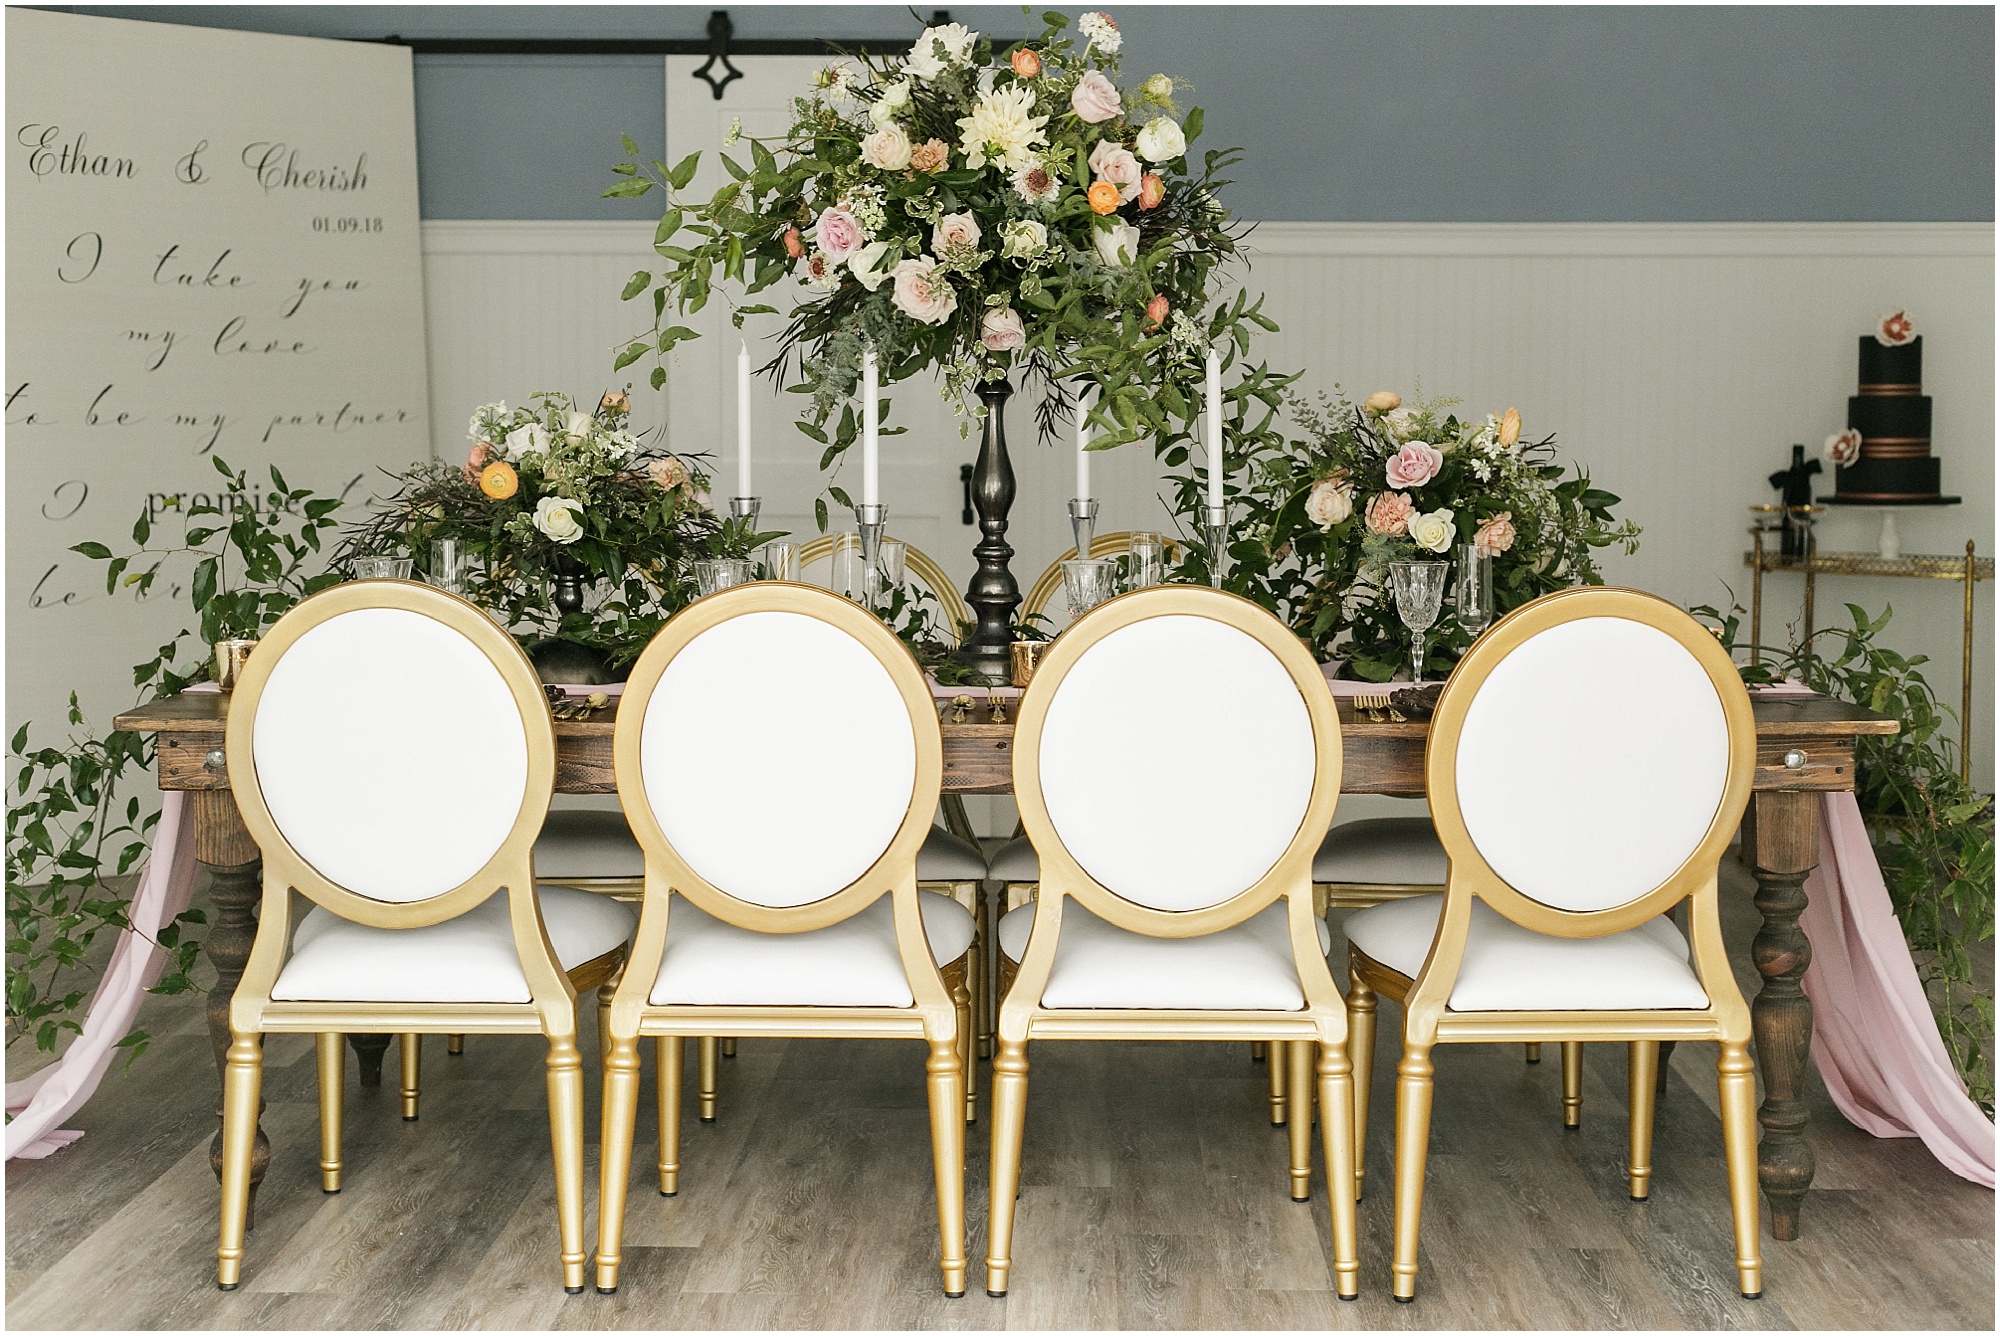 Indoor reception setup with greenery and brass highlights.